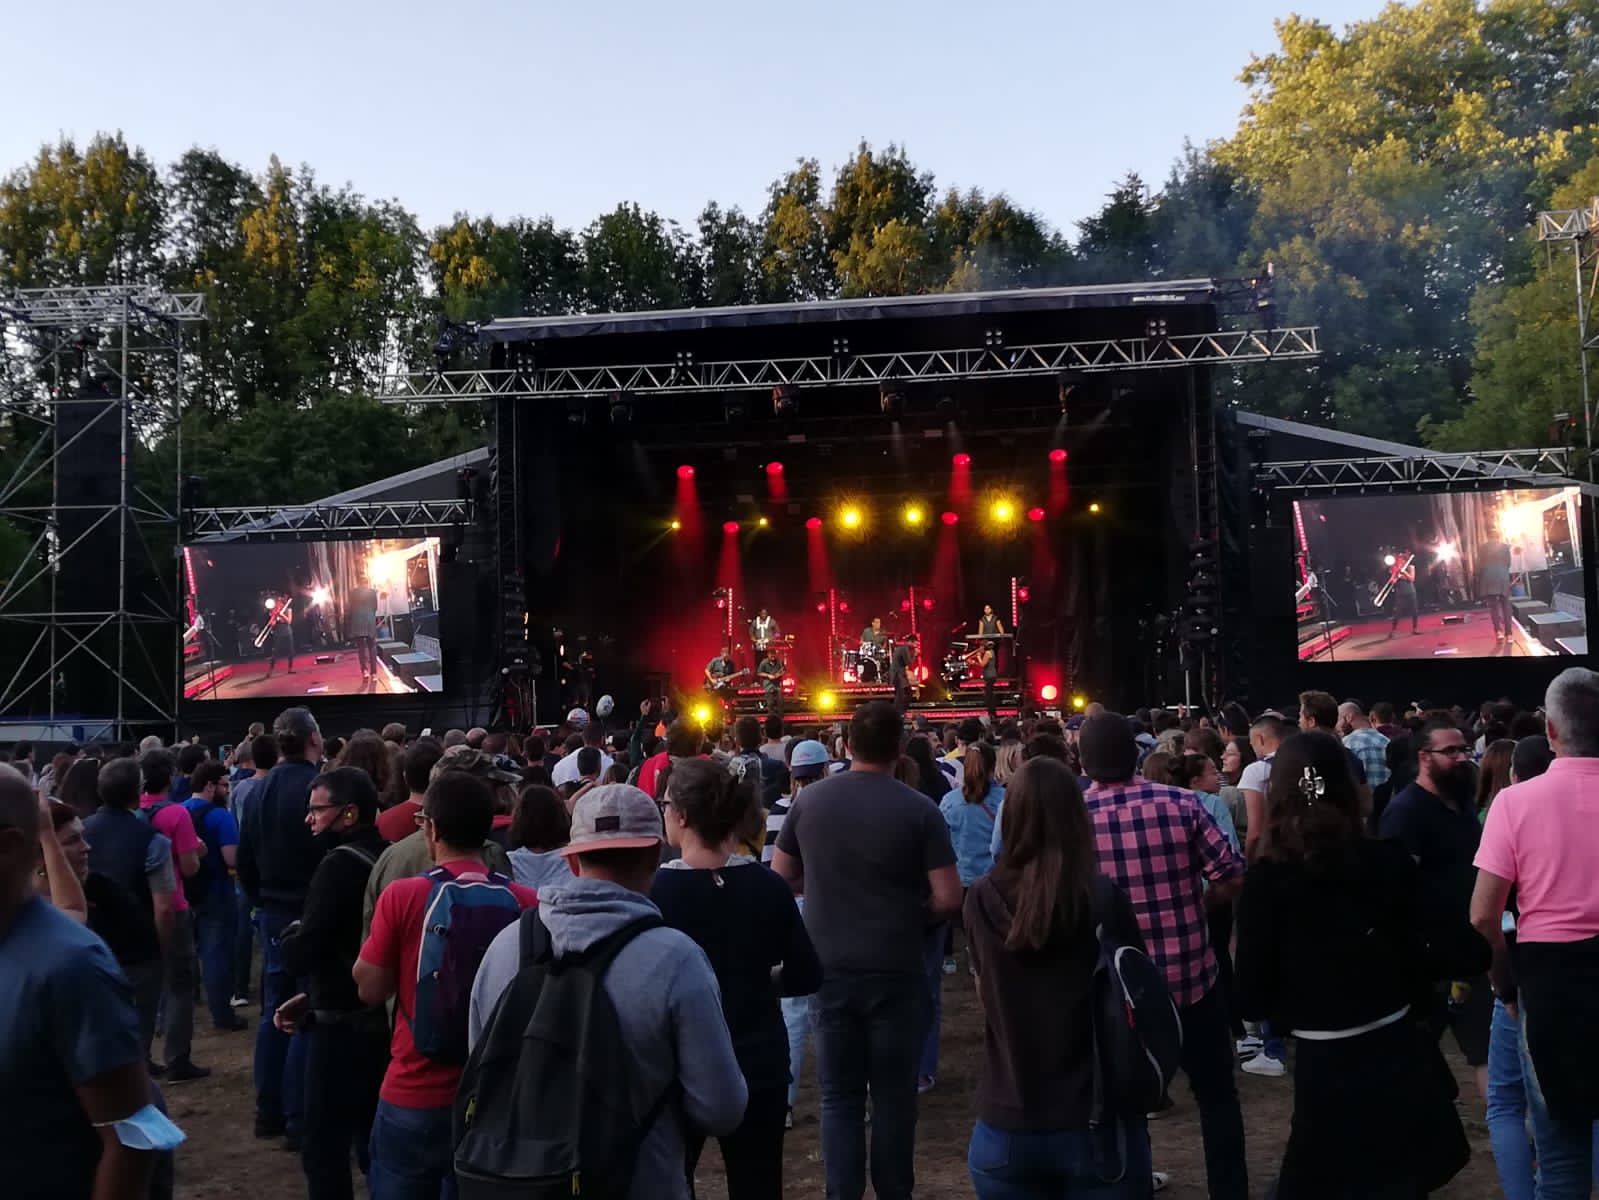 Chipshow C-Lite-D P3.9 Rental LED Screen Shown on Musical Salon Party in France